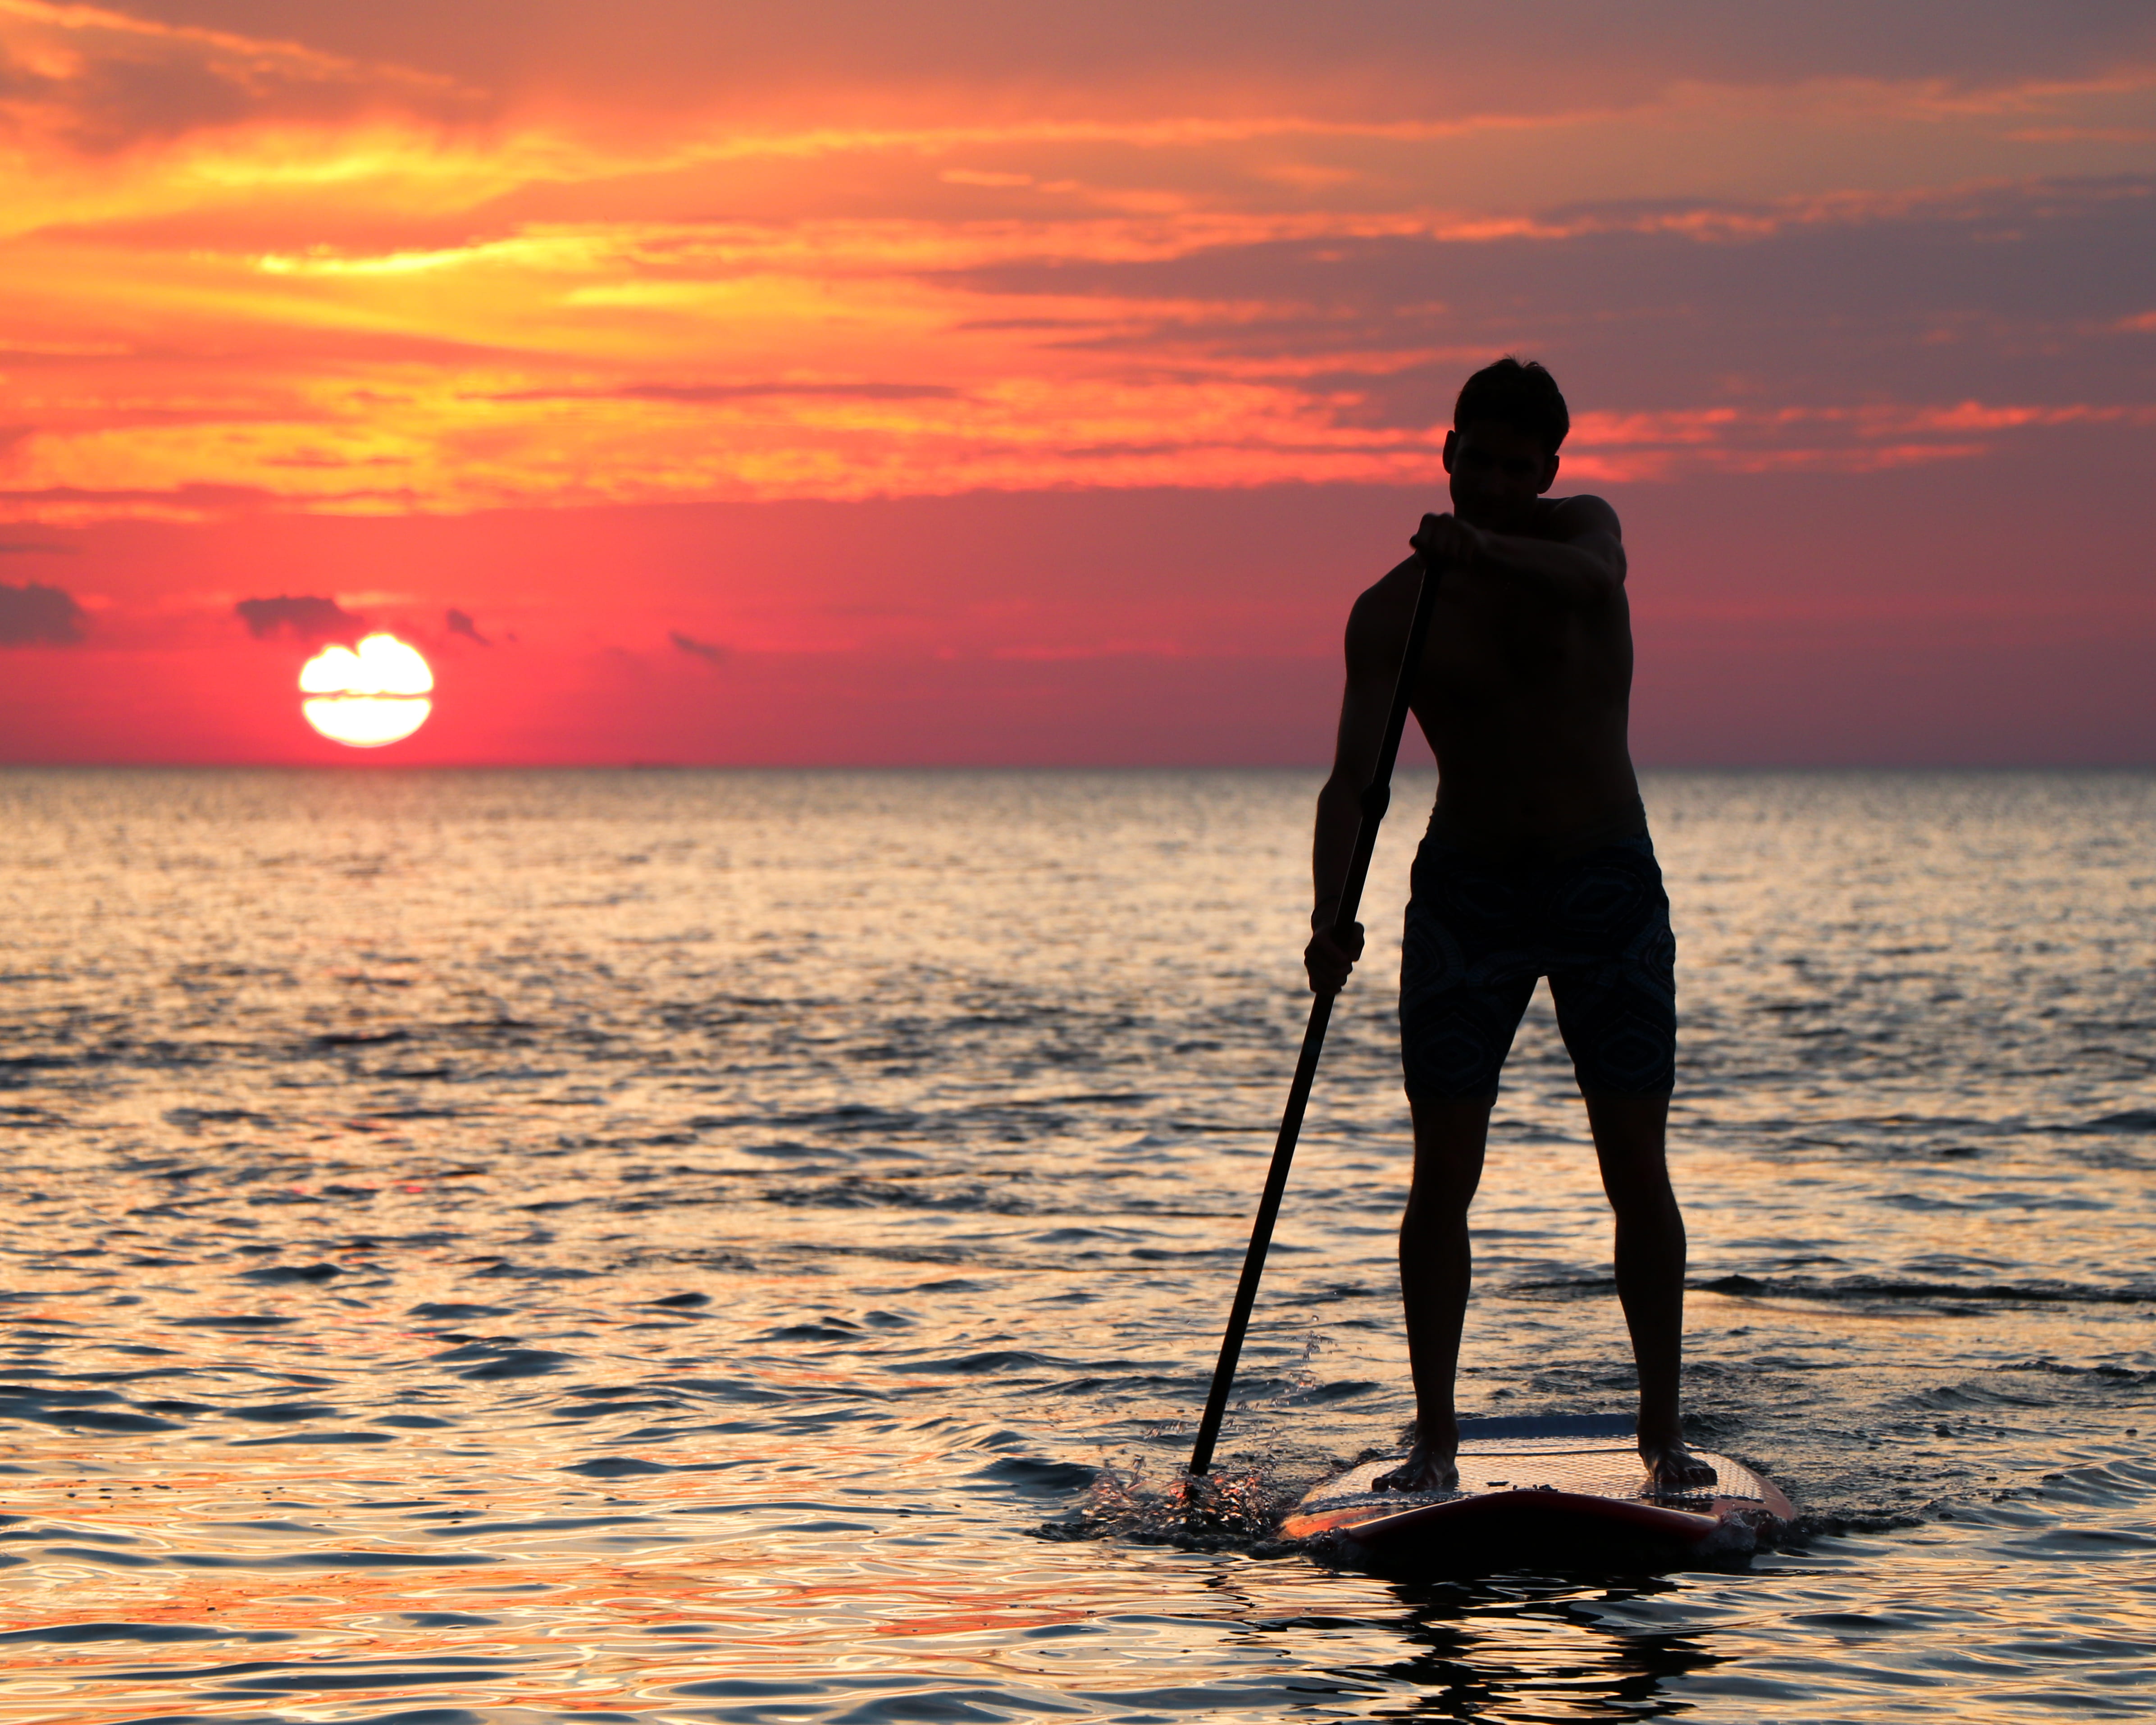 man riding paddleboard silhouette during golden hour, Silhouette photography of man holding pole during sunset